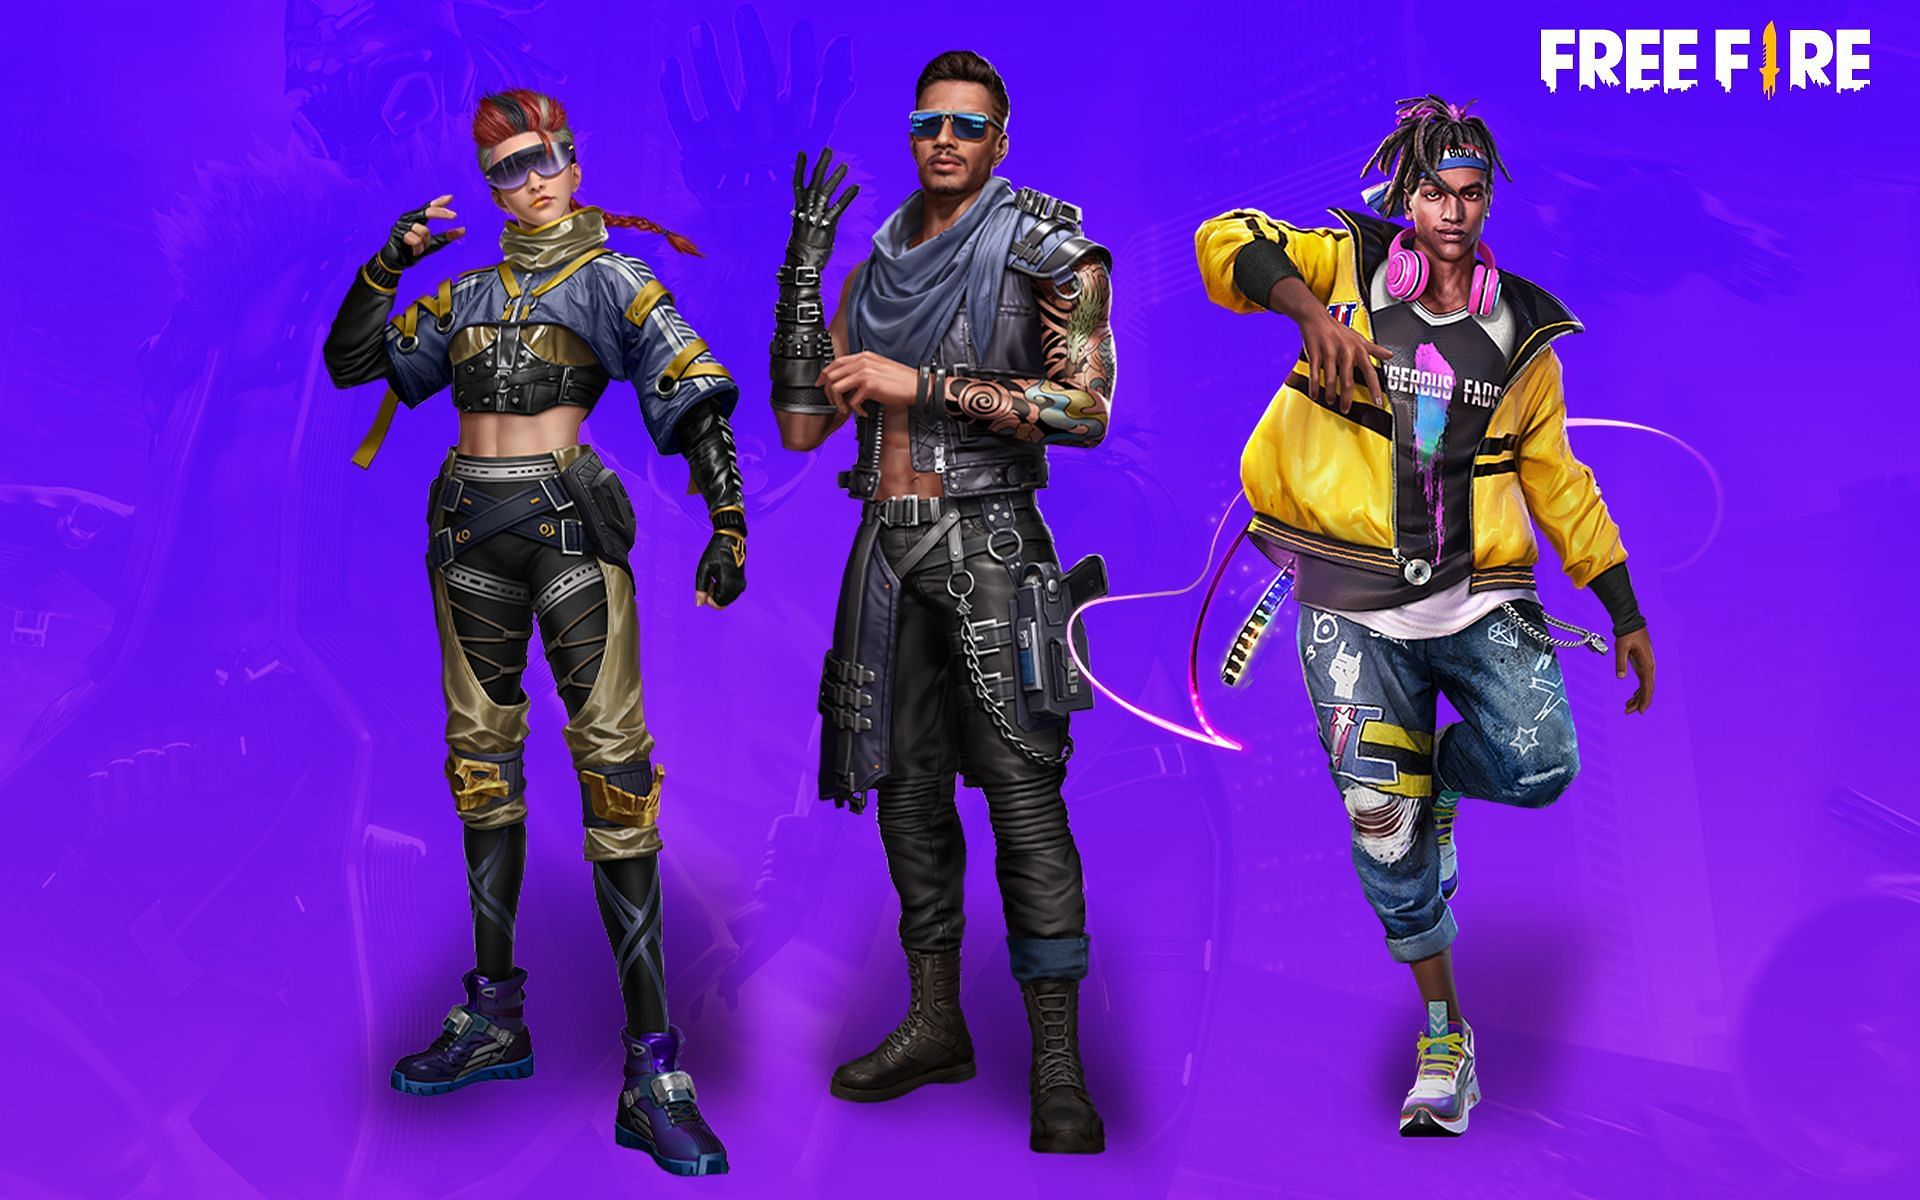 Several new characters are available for Gold in Free Fire (Image via Sportskeeda)